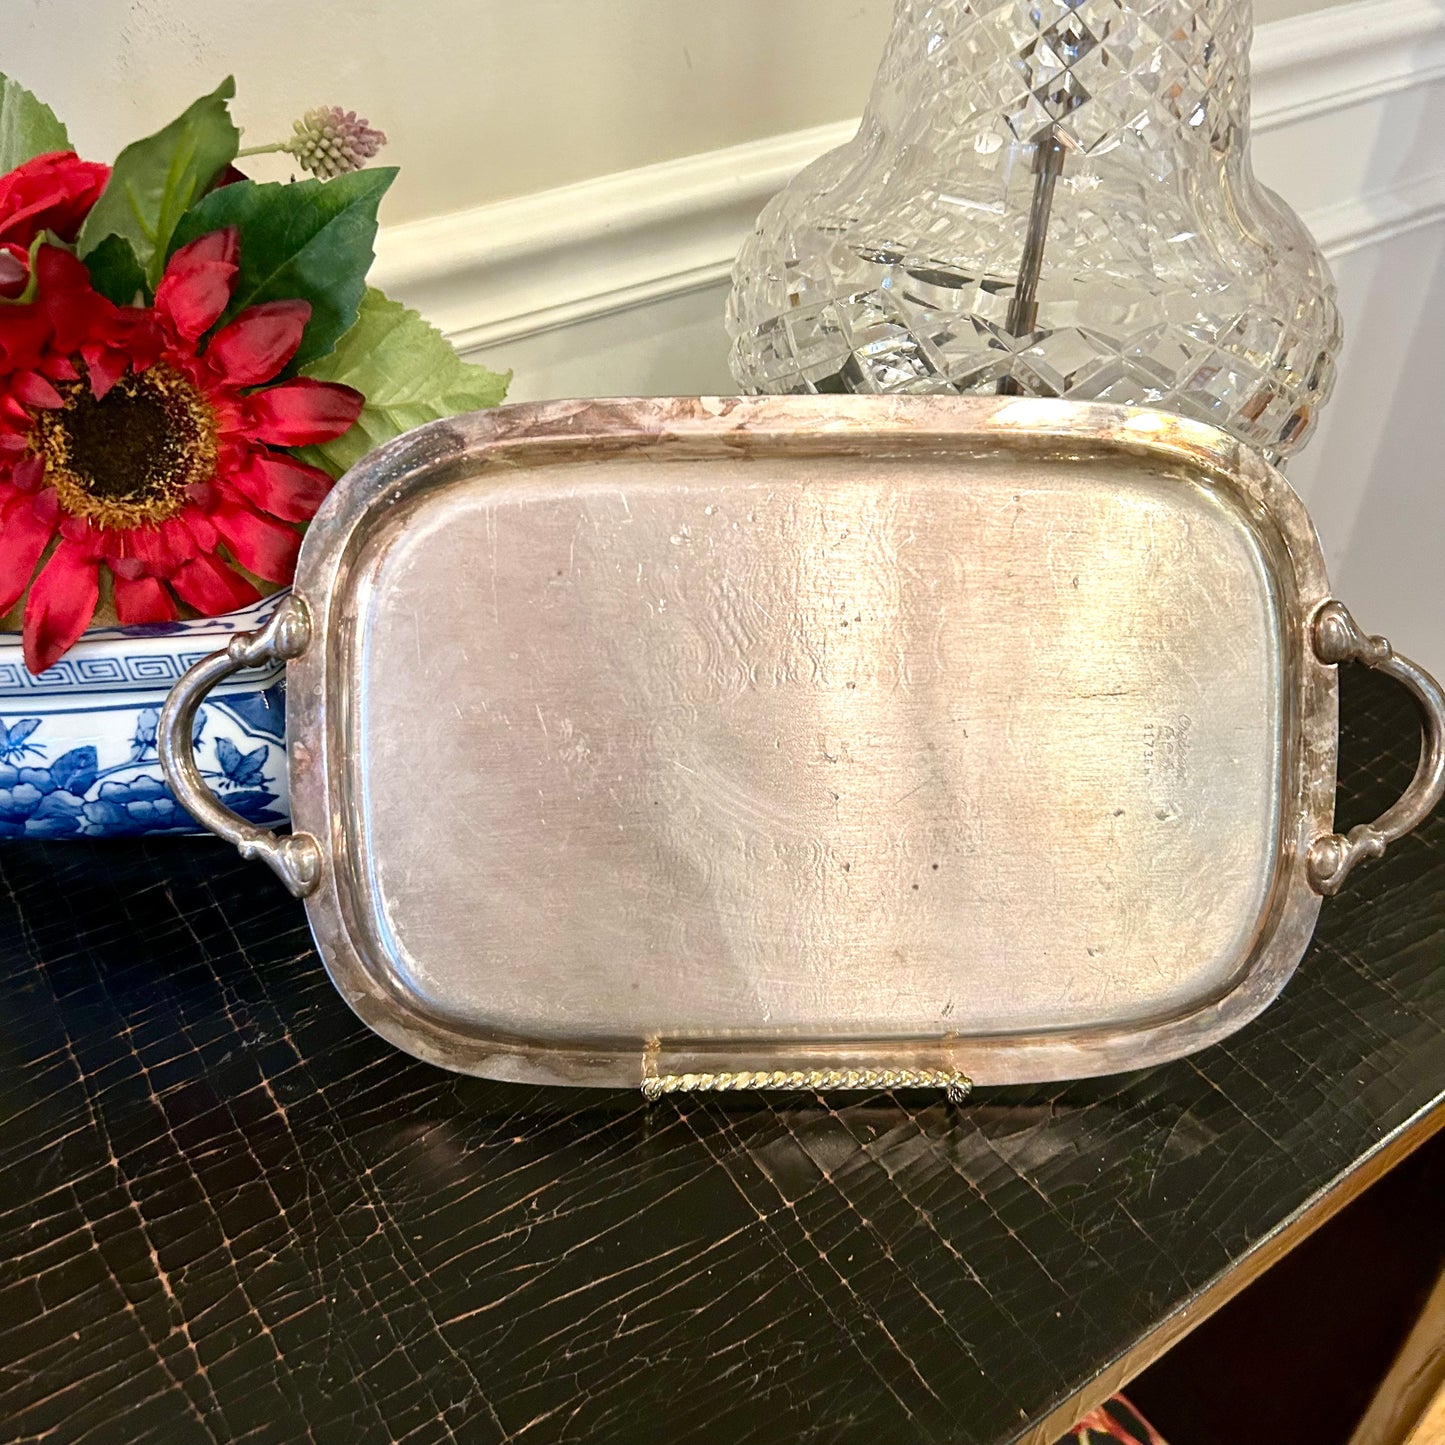 Sparkling vintage Silver plate baroque tray by designer Cresent